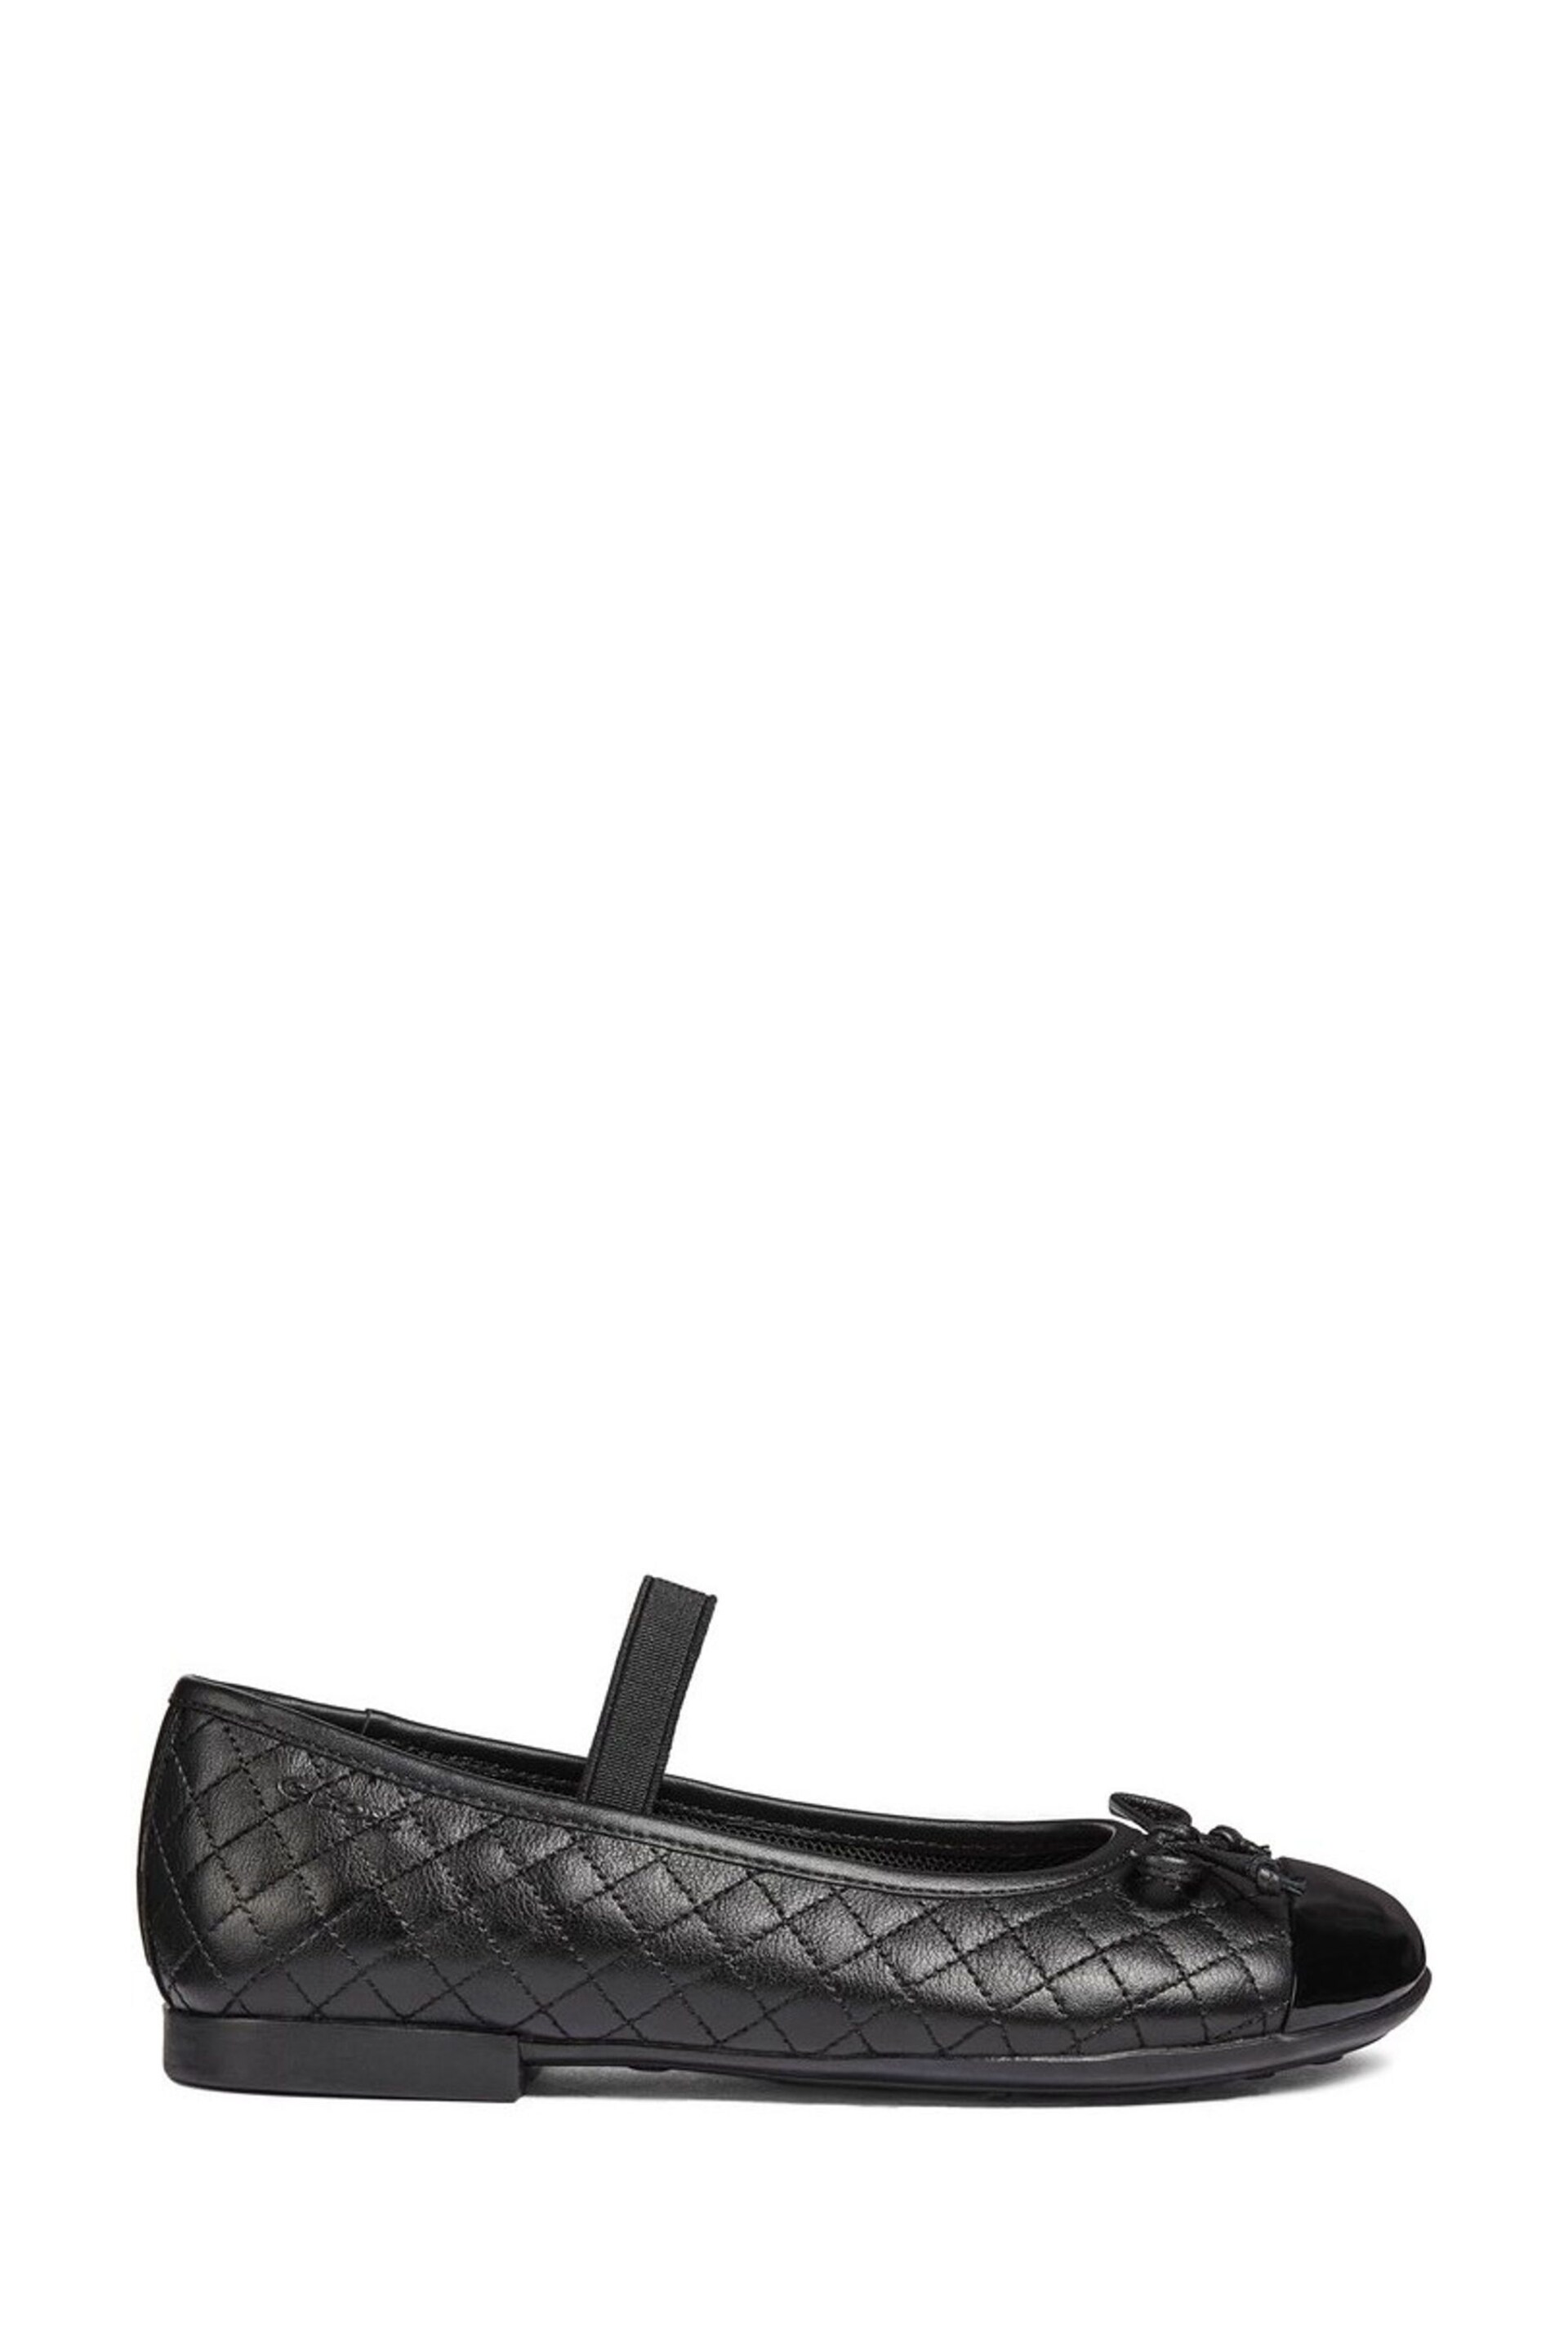 Geox Black Quilted Ballerina Shoe - Image 1 of 4